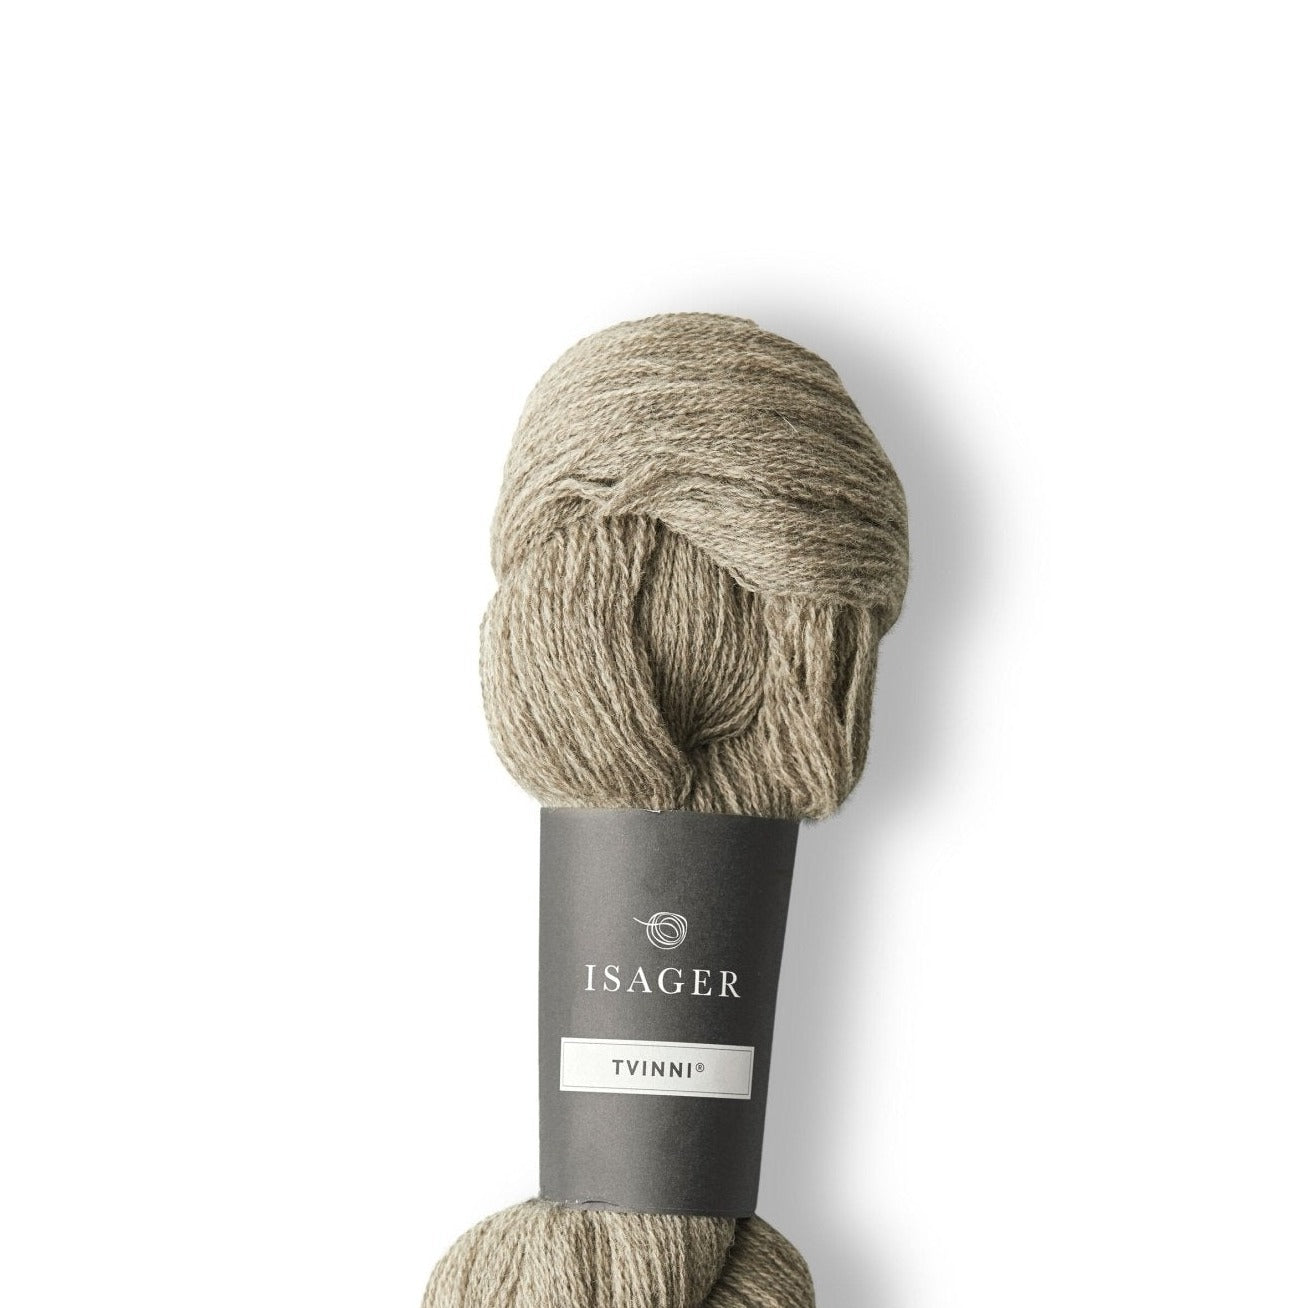 Isager Tvinni - 13s - 4 Ply - Isager - The Little Yarn Store